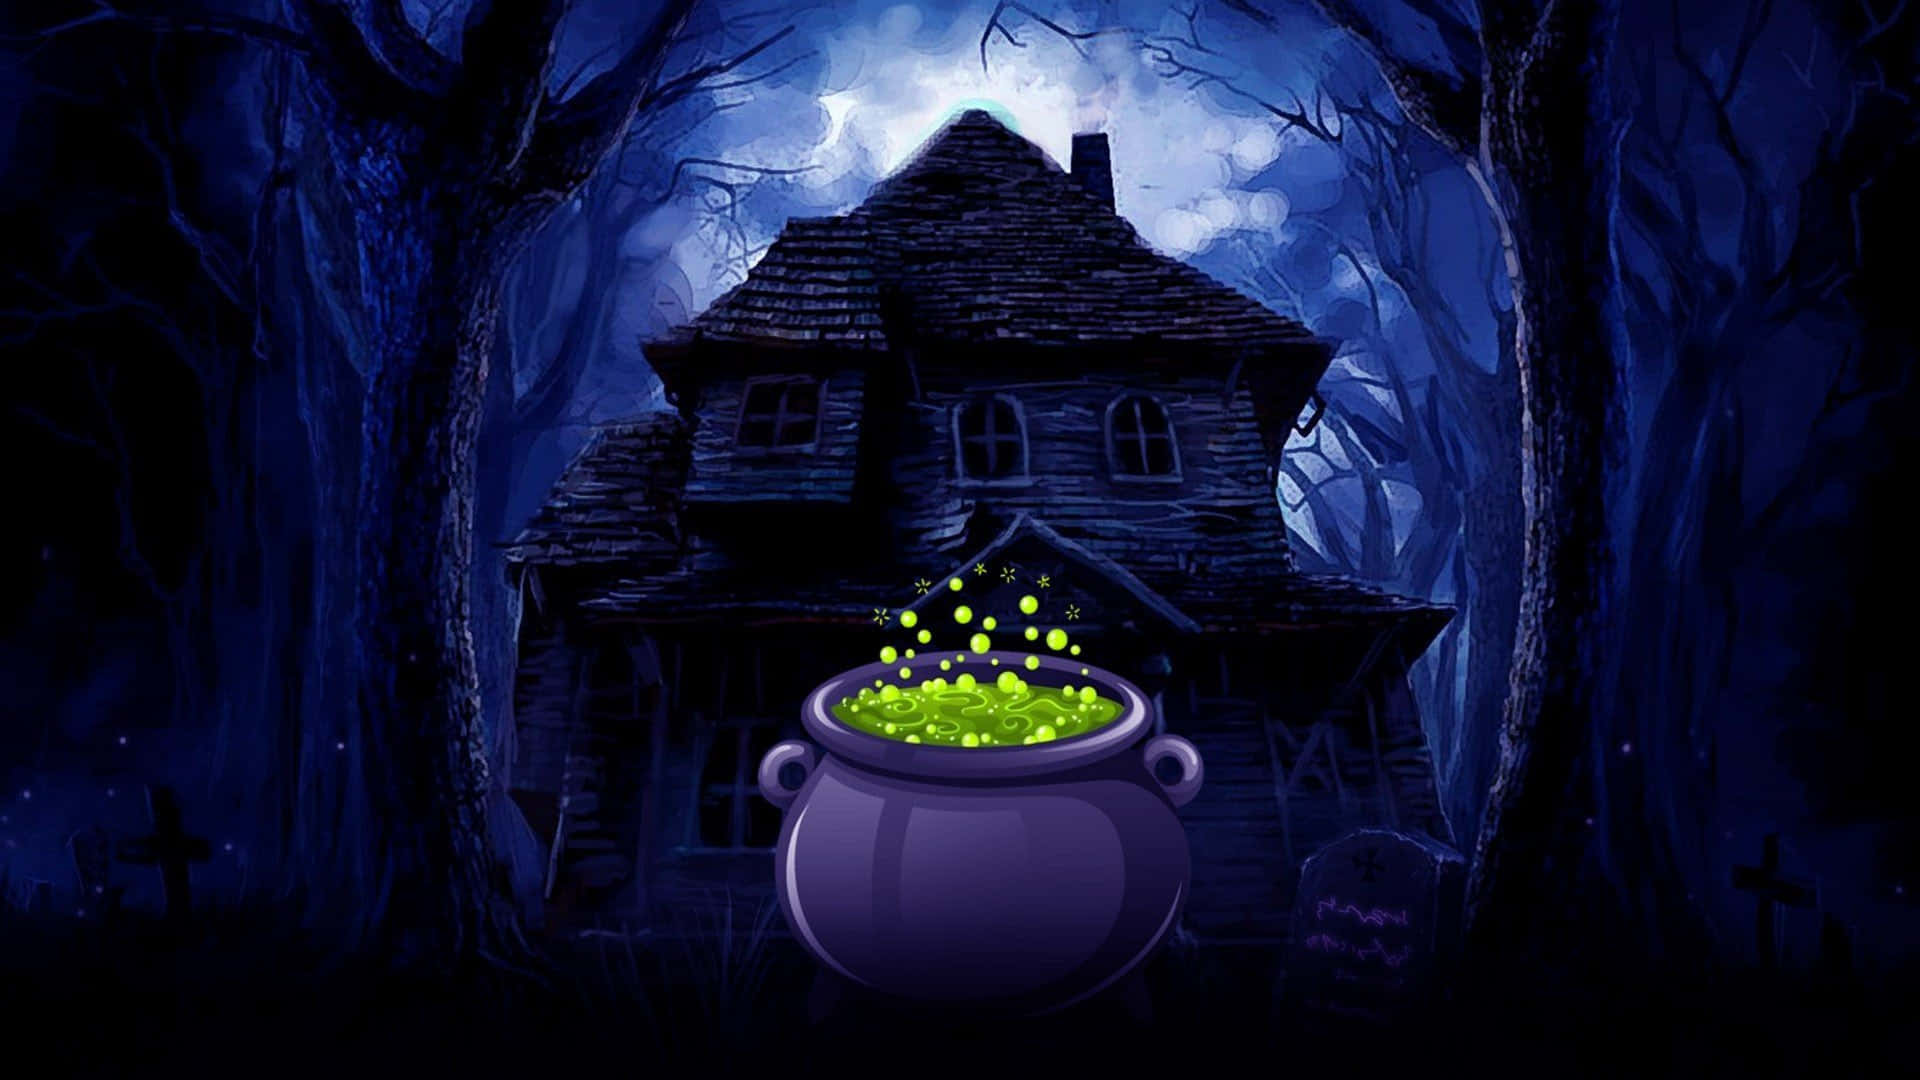 Mysterious boiling cauldron over a fire Wallpaper